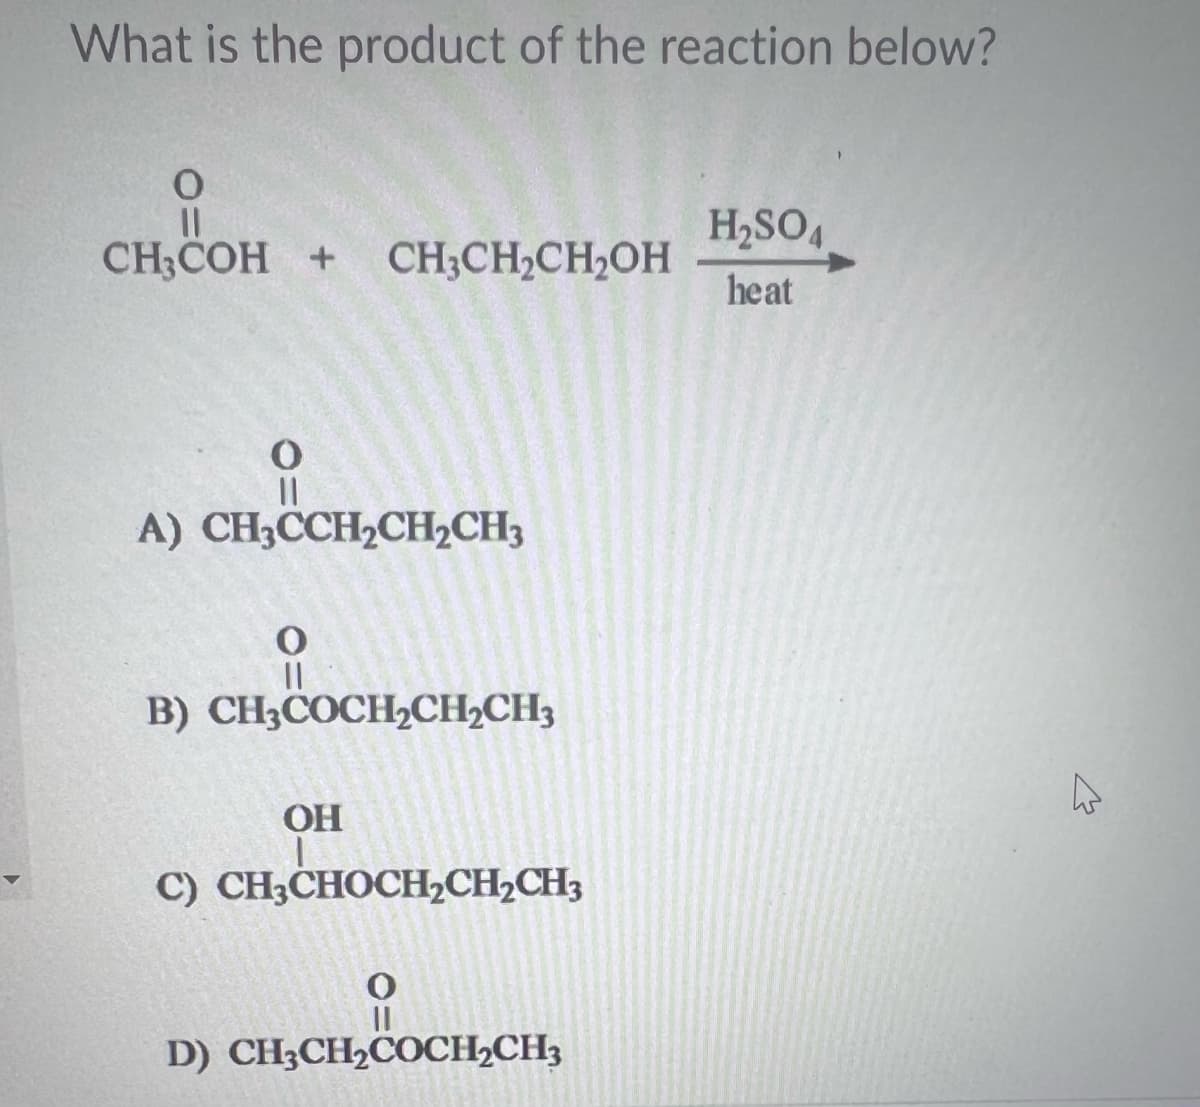 What is the product of the reaction below?
O
CH3COH + CH3CH₂CH₂OH
||
A) CH₂CCH₂CH₂CH3
O
B) CH3COCH2CH2CH3
OH
I
C) CH3CHOCH₂CH₂CH3
D) CH3CH₂COCH₂CH3
H₂SO4
heat
E